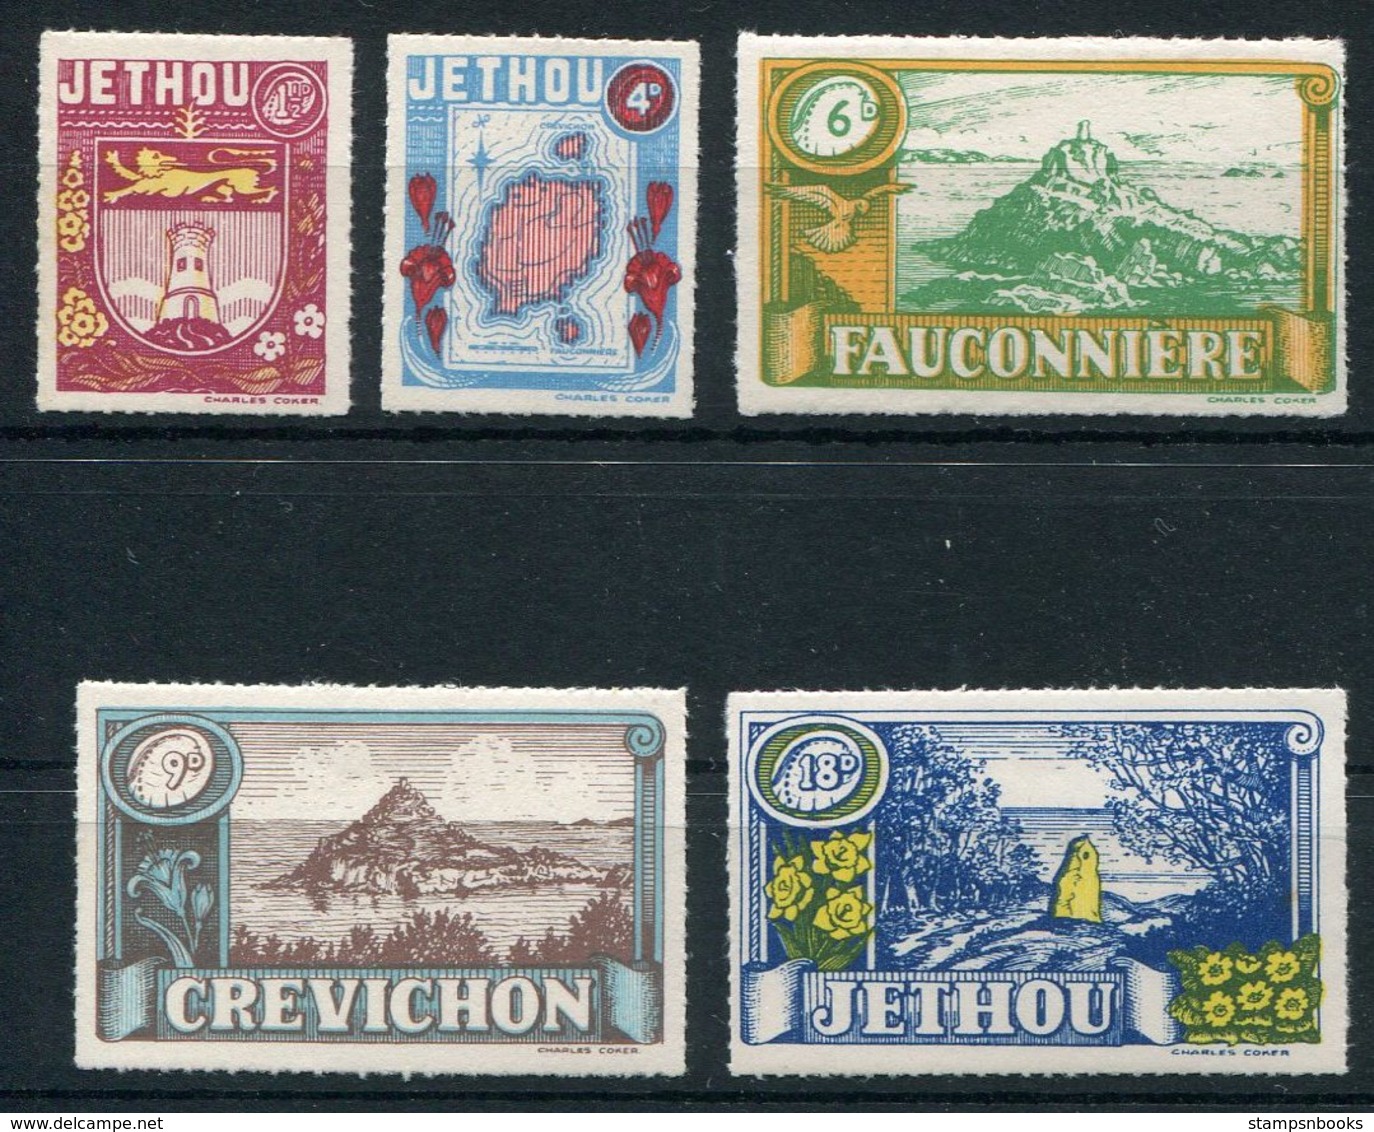 1960 Guernsey Jethou Scenes Definitives Set. Unmounted Mint - Local Issues